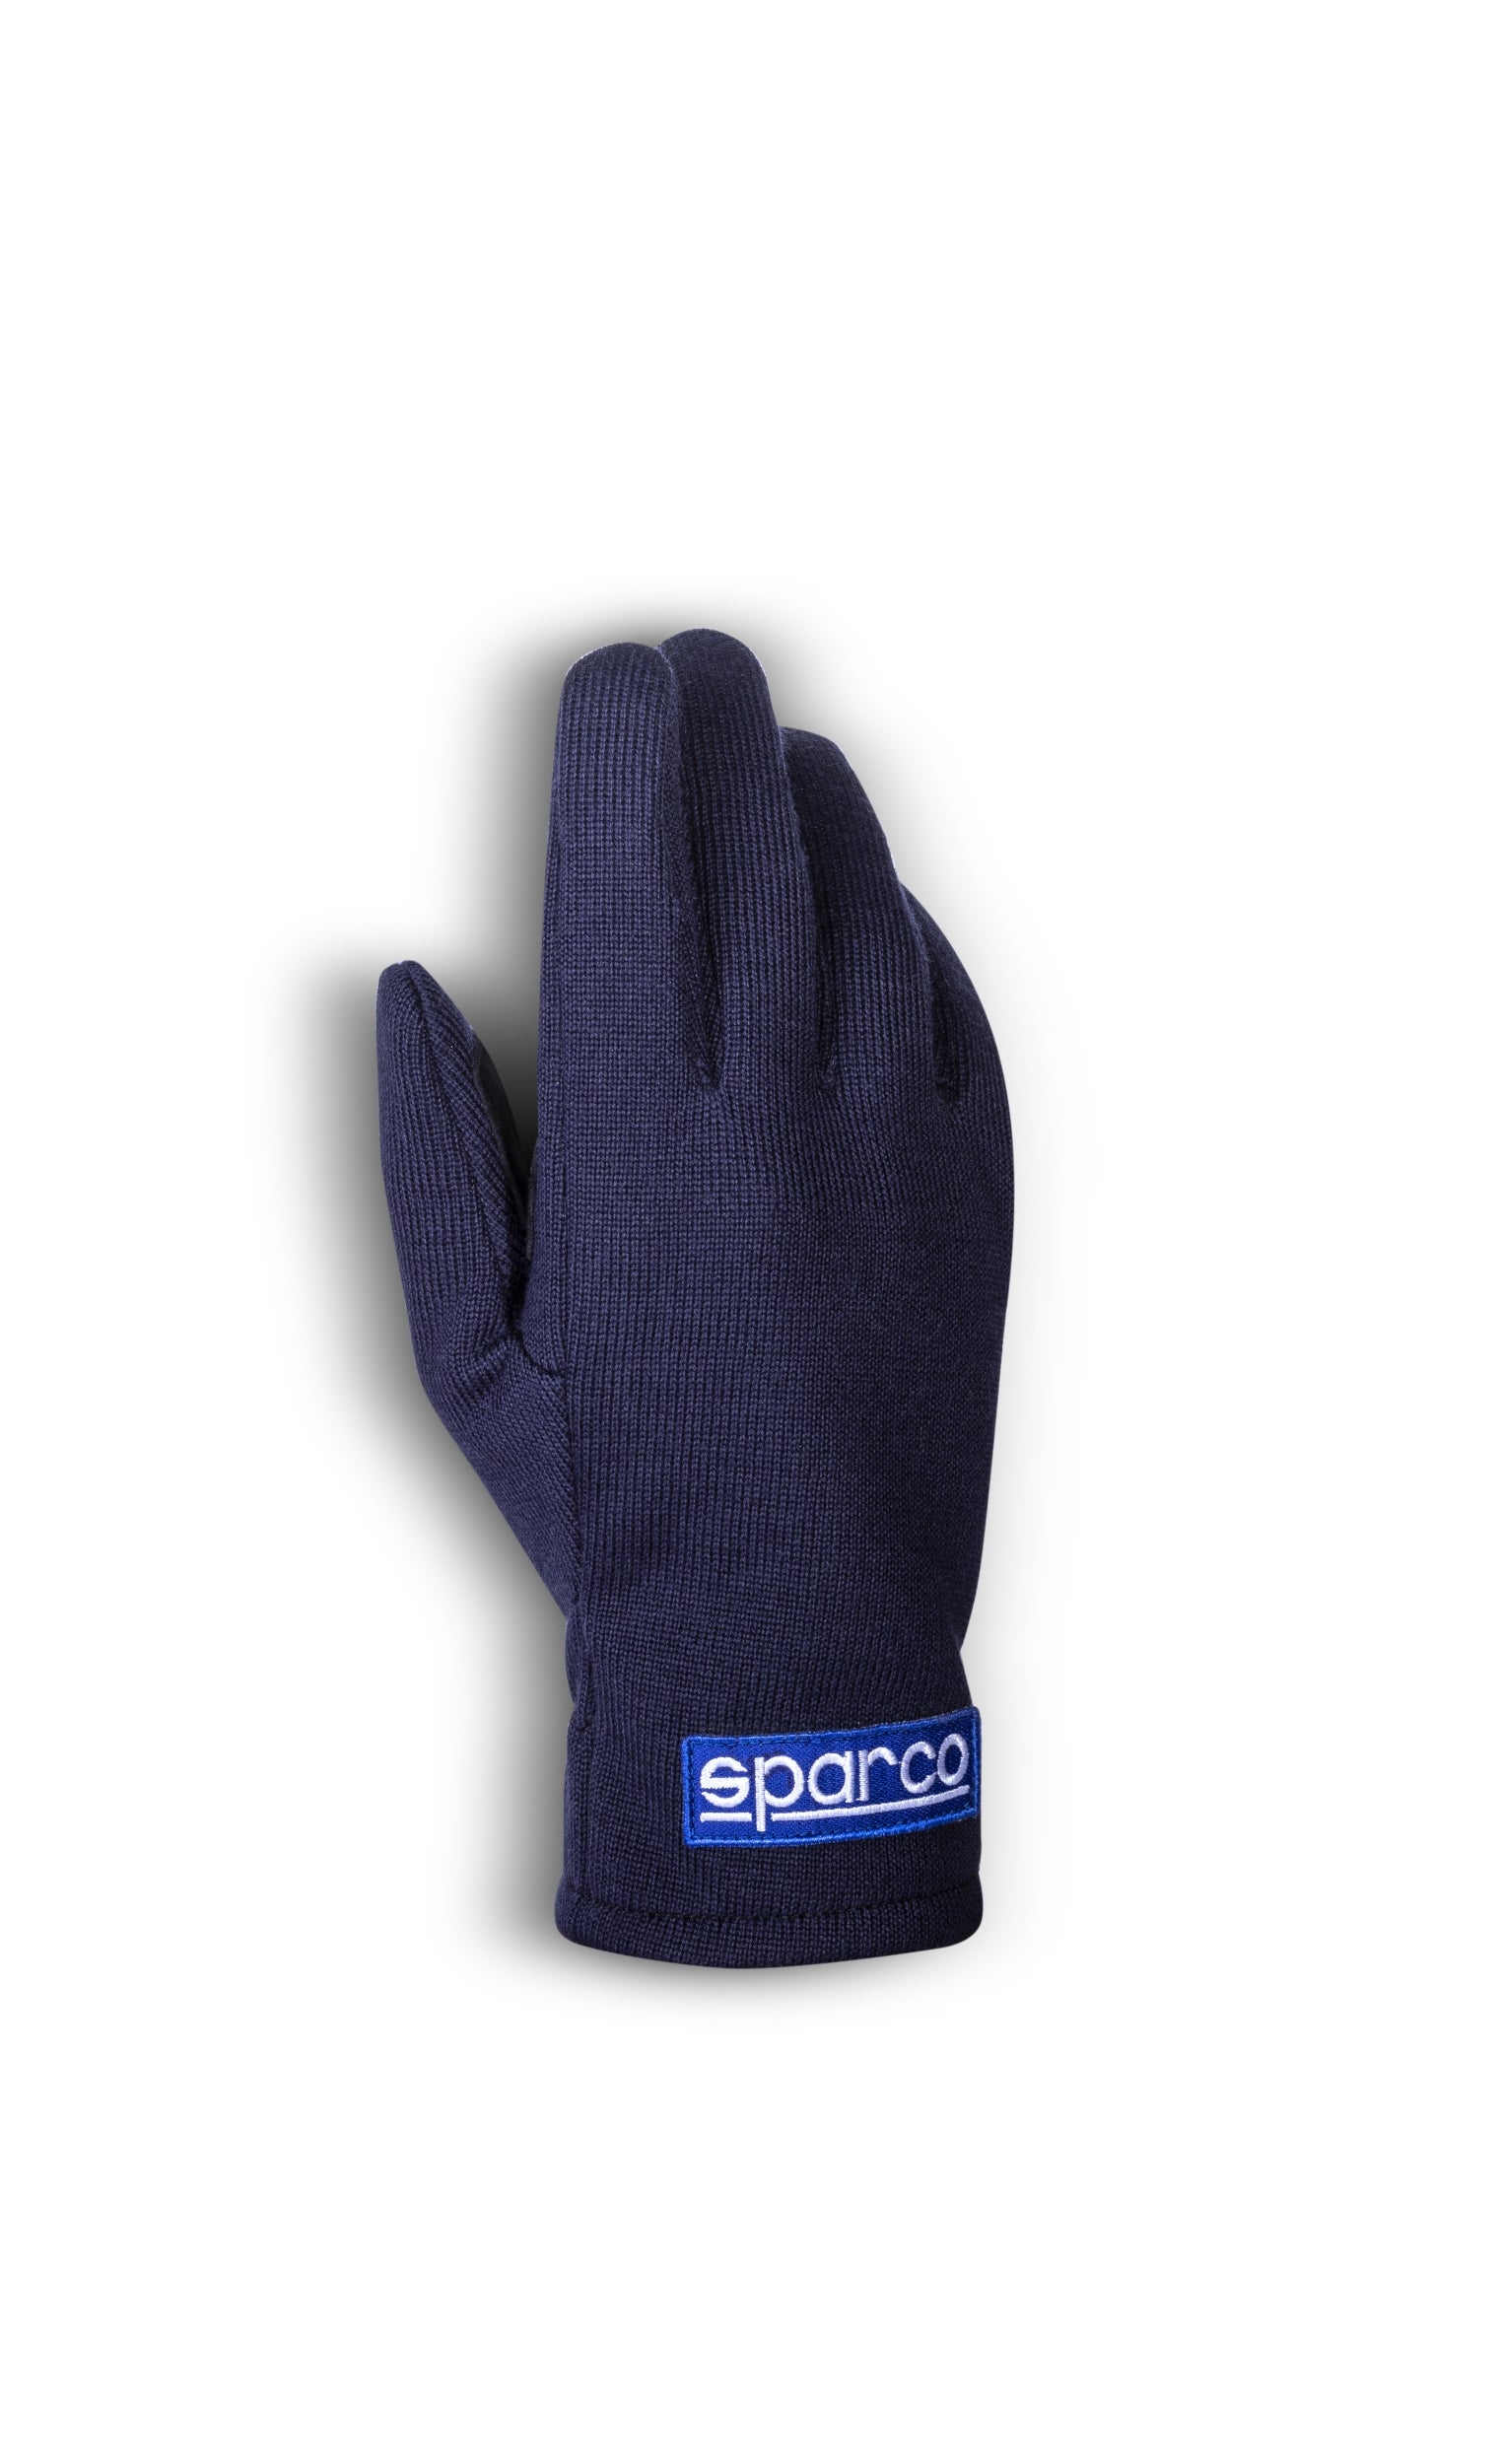 SPARCO 00208211BM NEW WOOL SPORTDRIVE Gloves, navy blue, size 11 Photo-1 